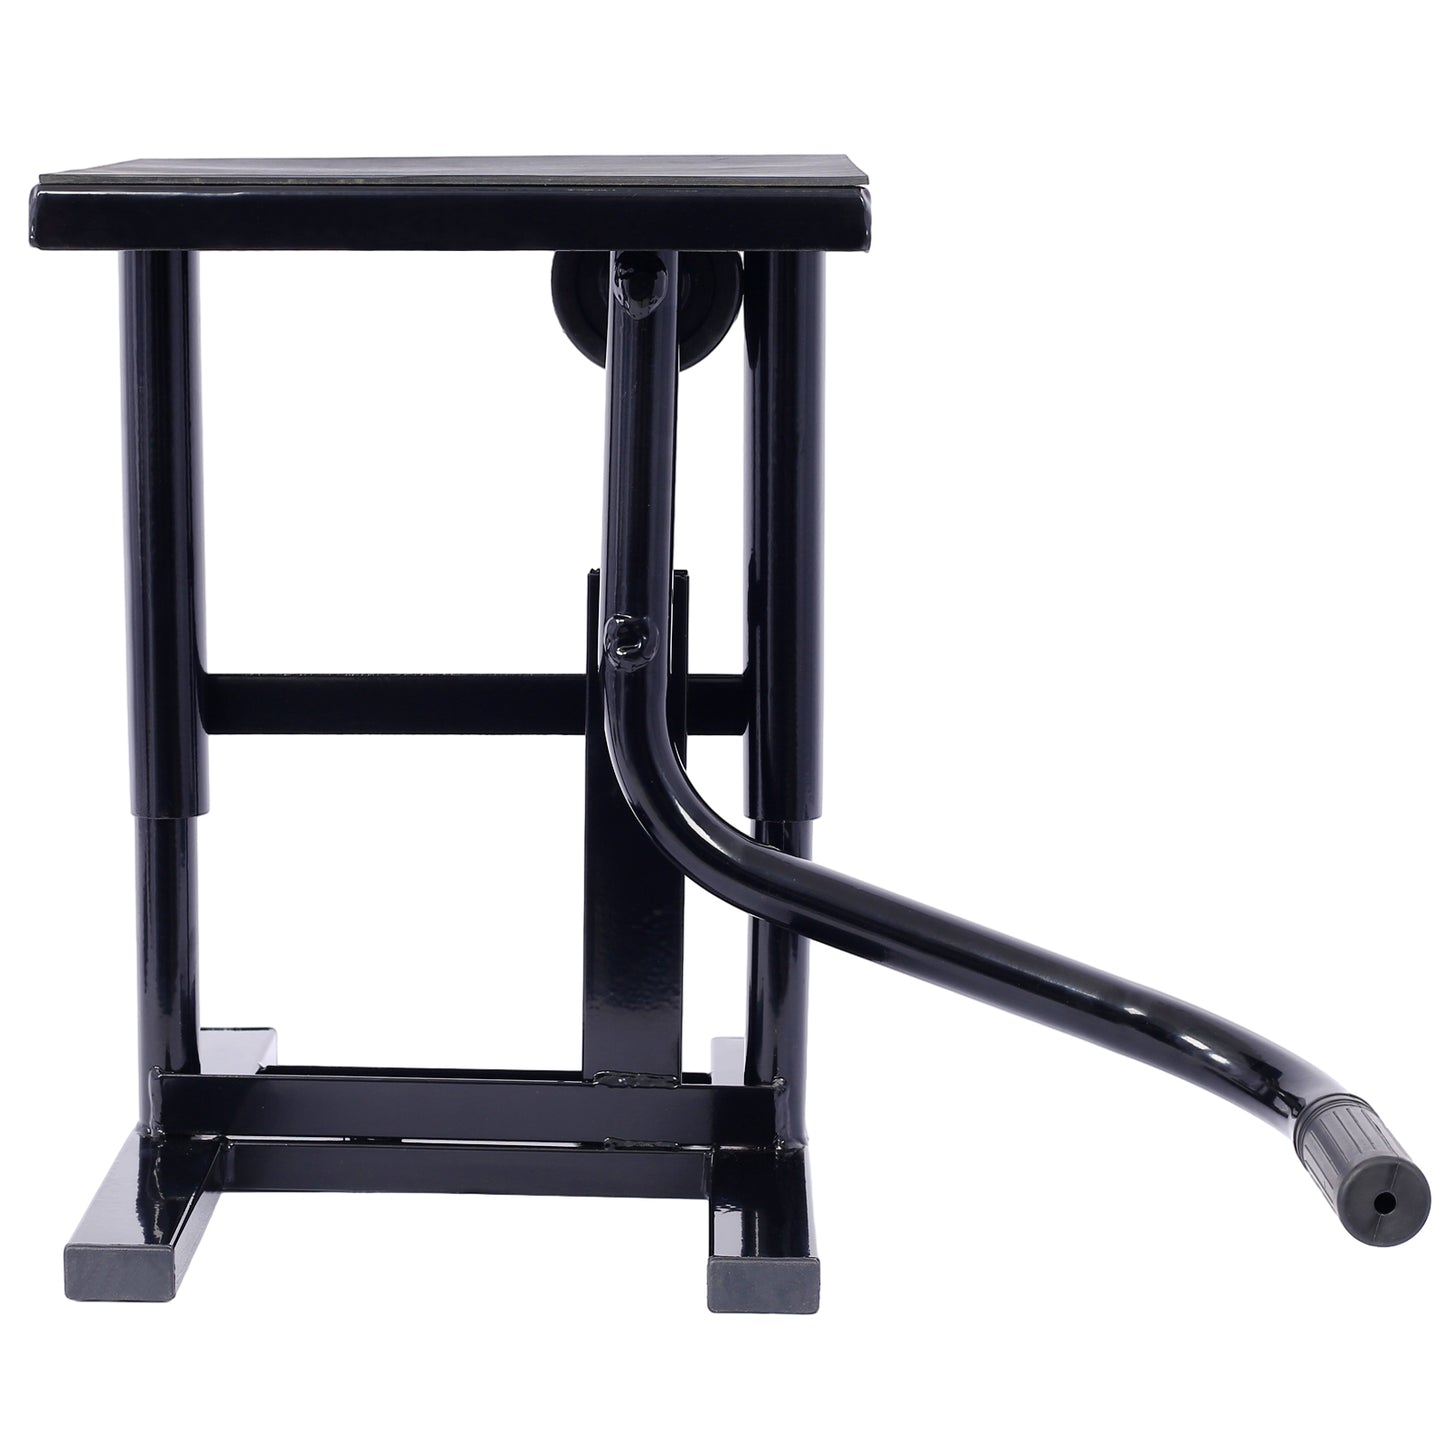 Motorcycle Dirt Bike Stands and Lifts Jack Stand Steel Lift 11"-16.5" Adjustable Height 330 LBS Load Capacity Heavy Duty Steel  Black